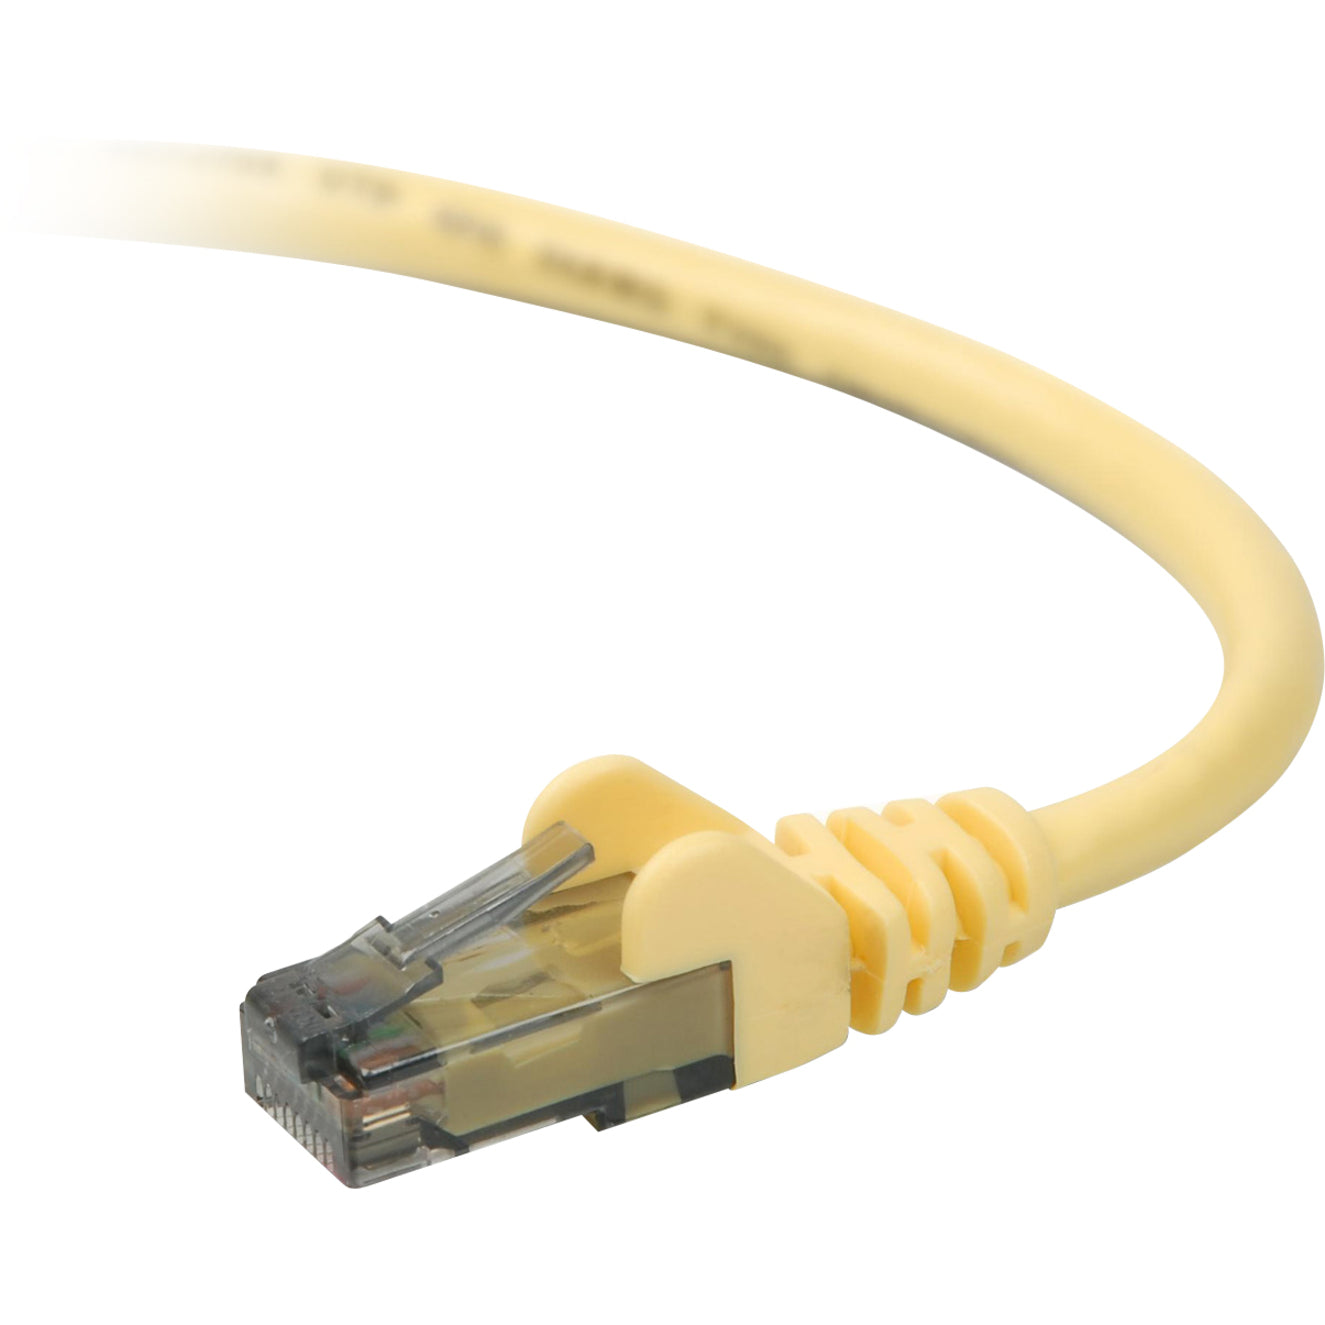 Belkin A3L980-30-YLW-S 900 Series Cat. 6 UTP Patch Cable, 30 ft, Snagless, Yellow